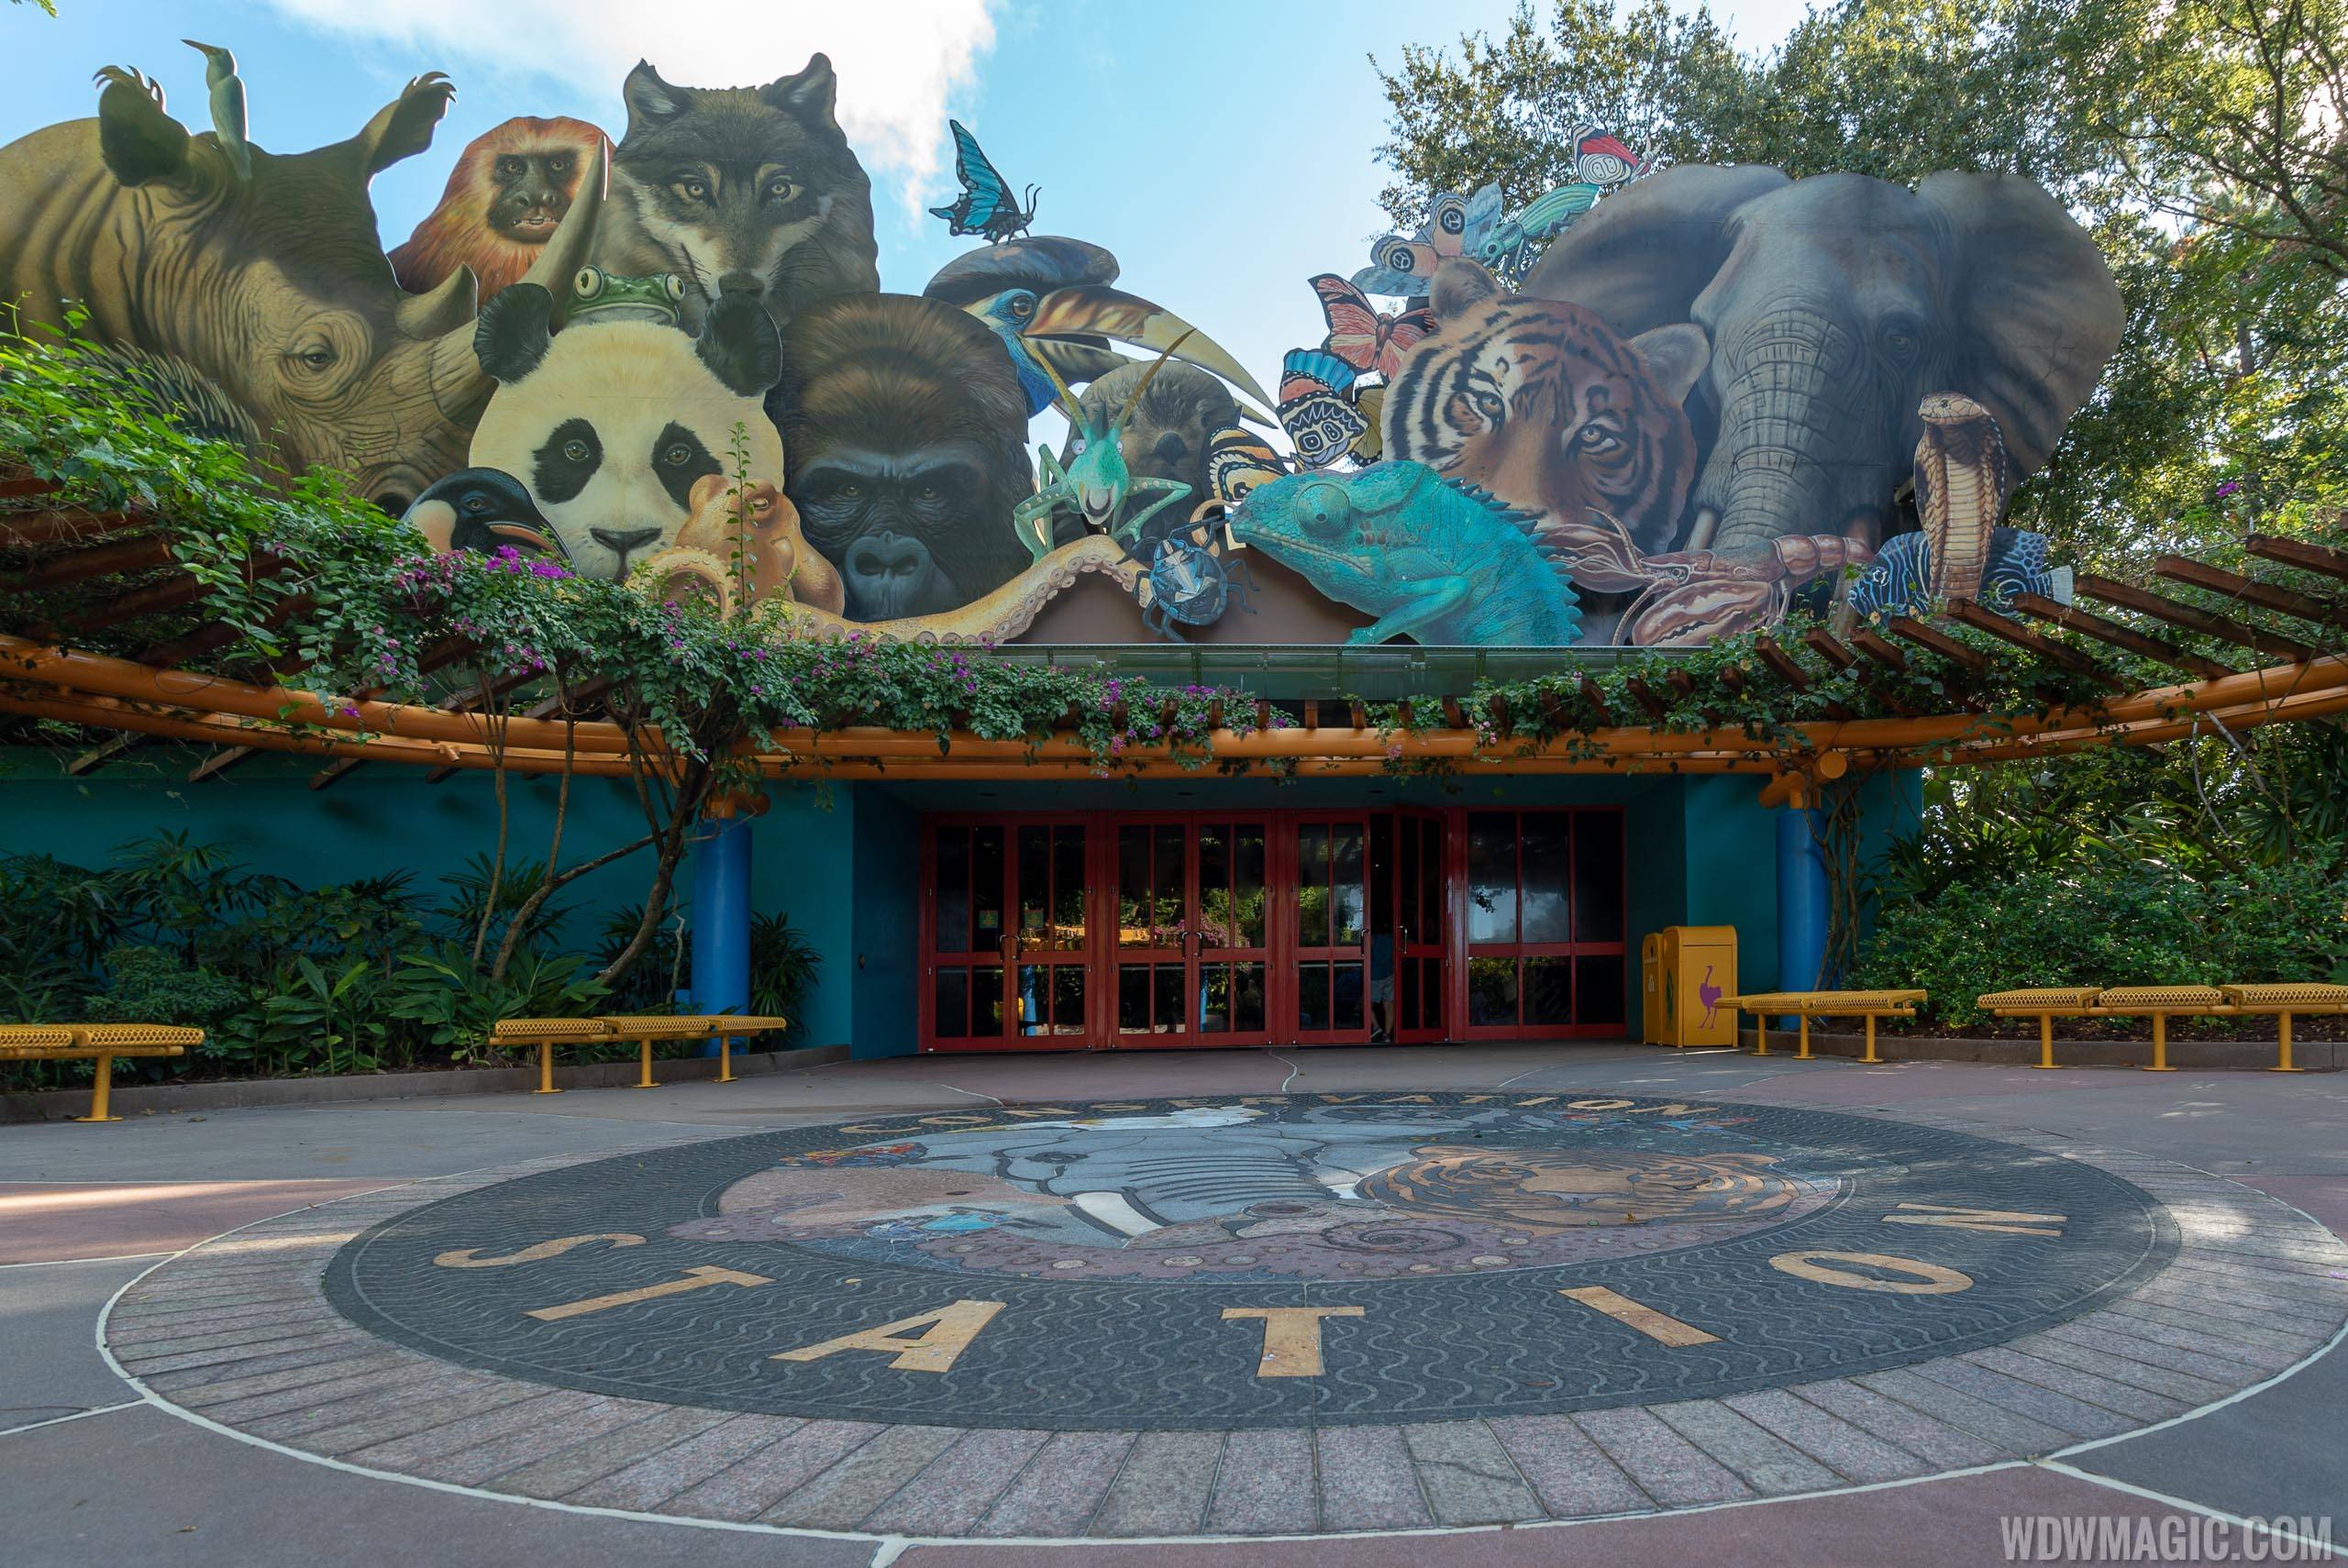 Affection Section at Rafiki's Planet Watch closing for refurbishment from next week